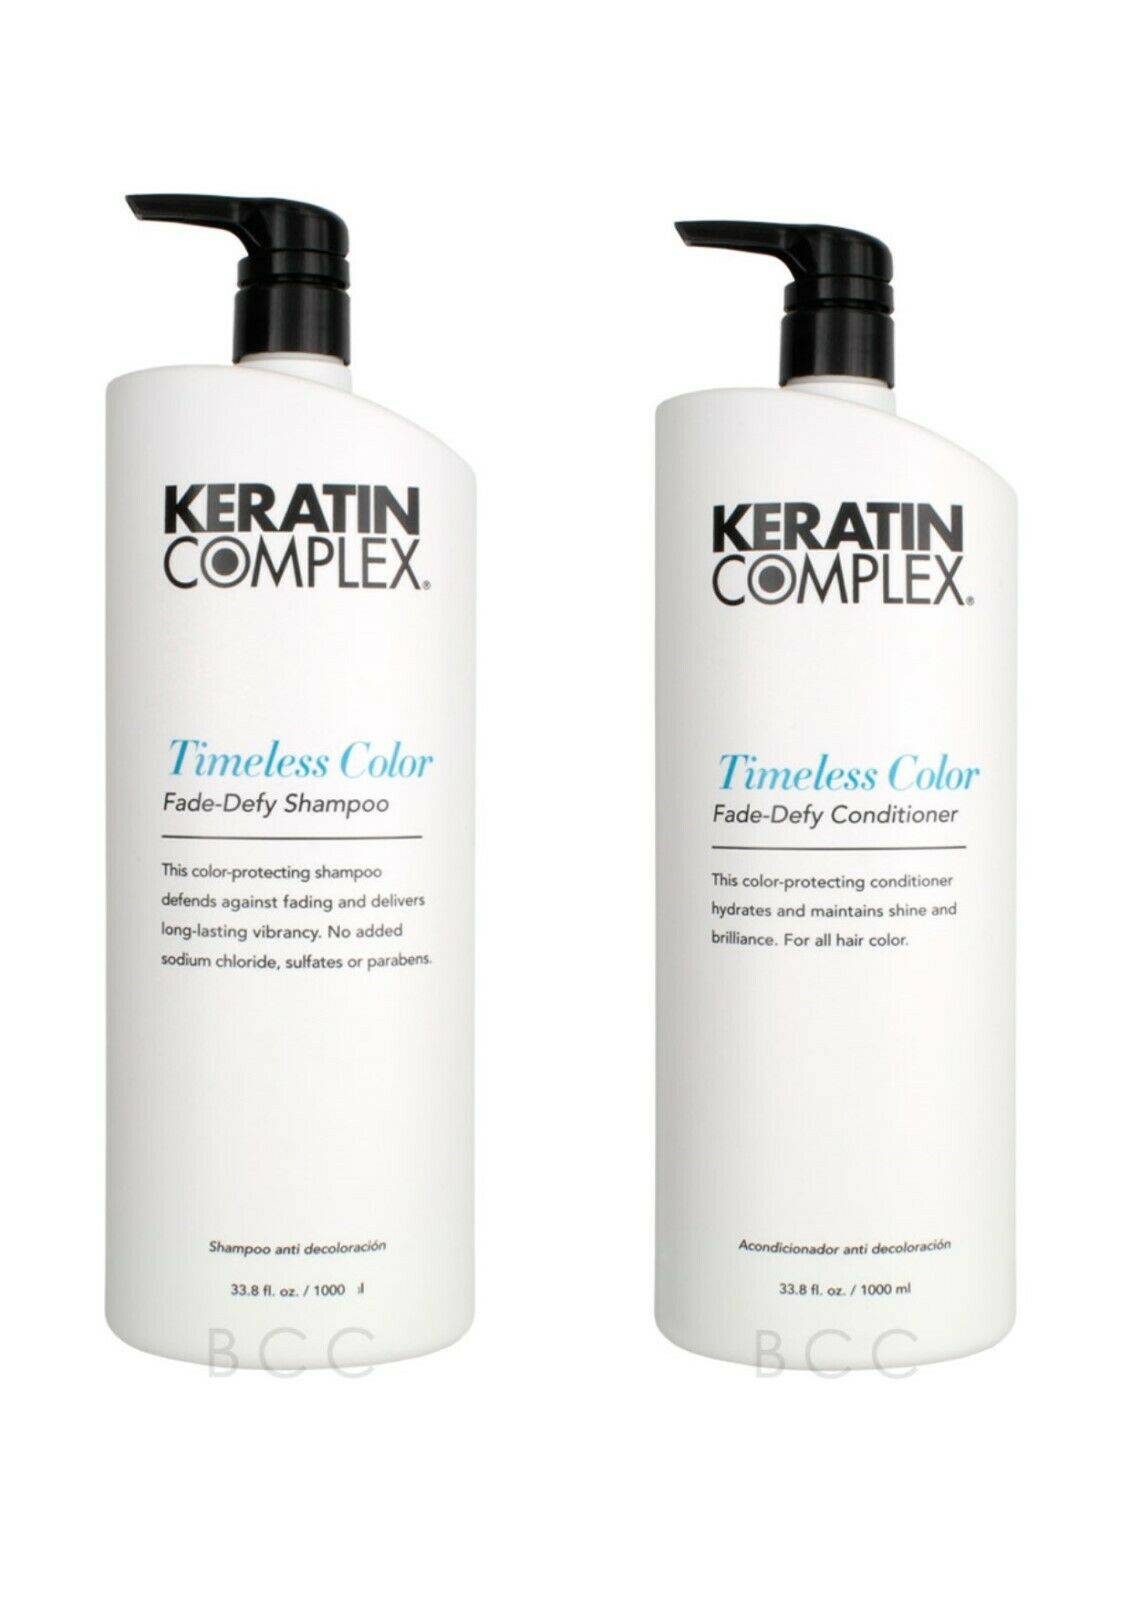 Keratin Complex Color Therapy Timeless Color Shampoo Conditioner 1lt Duo - On Line Hair Depot